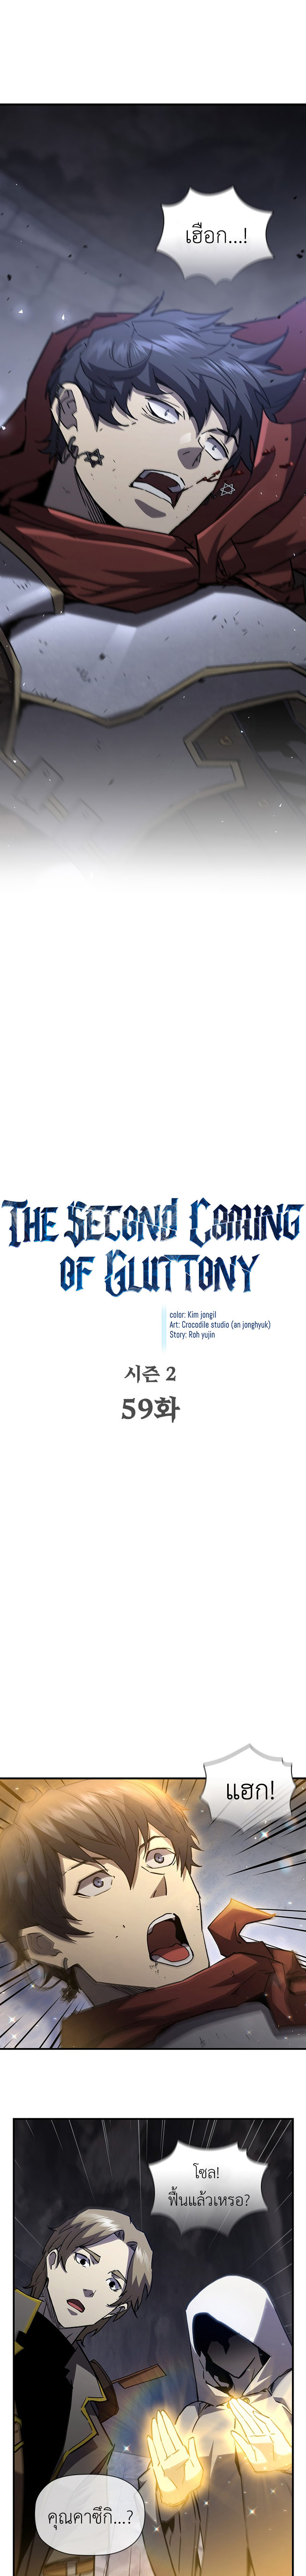 The Second Coming of Gluttony 105 (9)